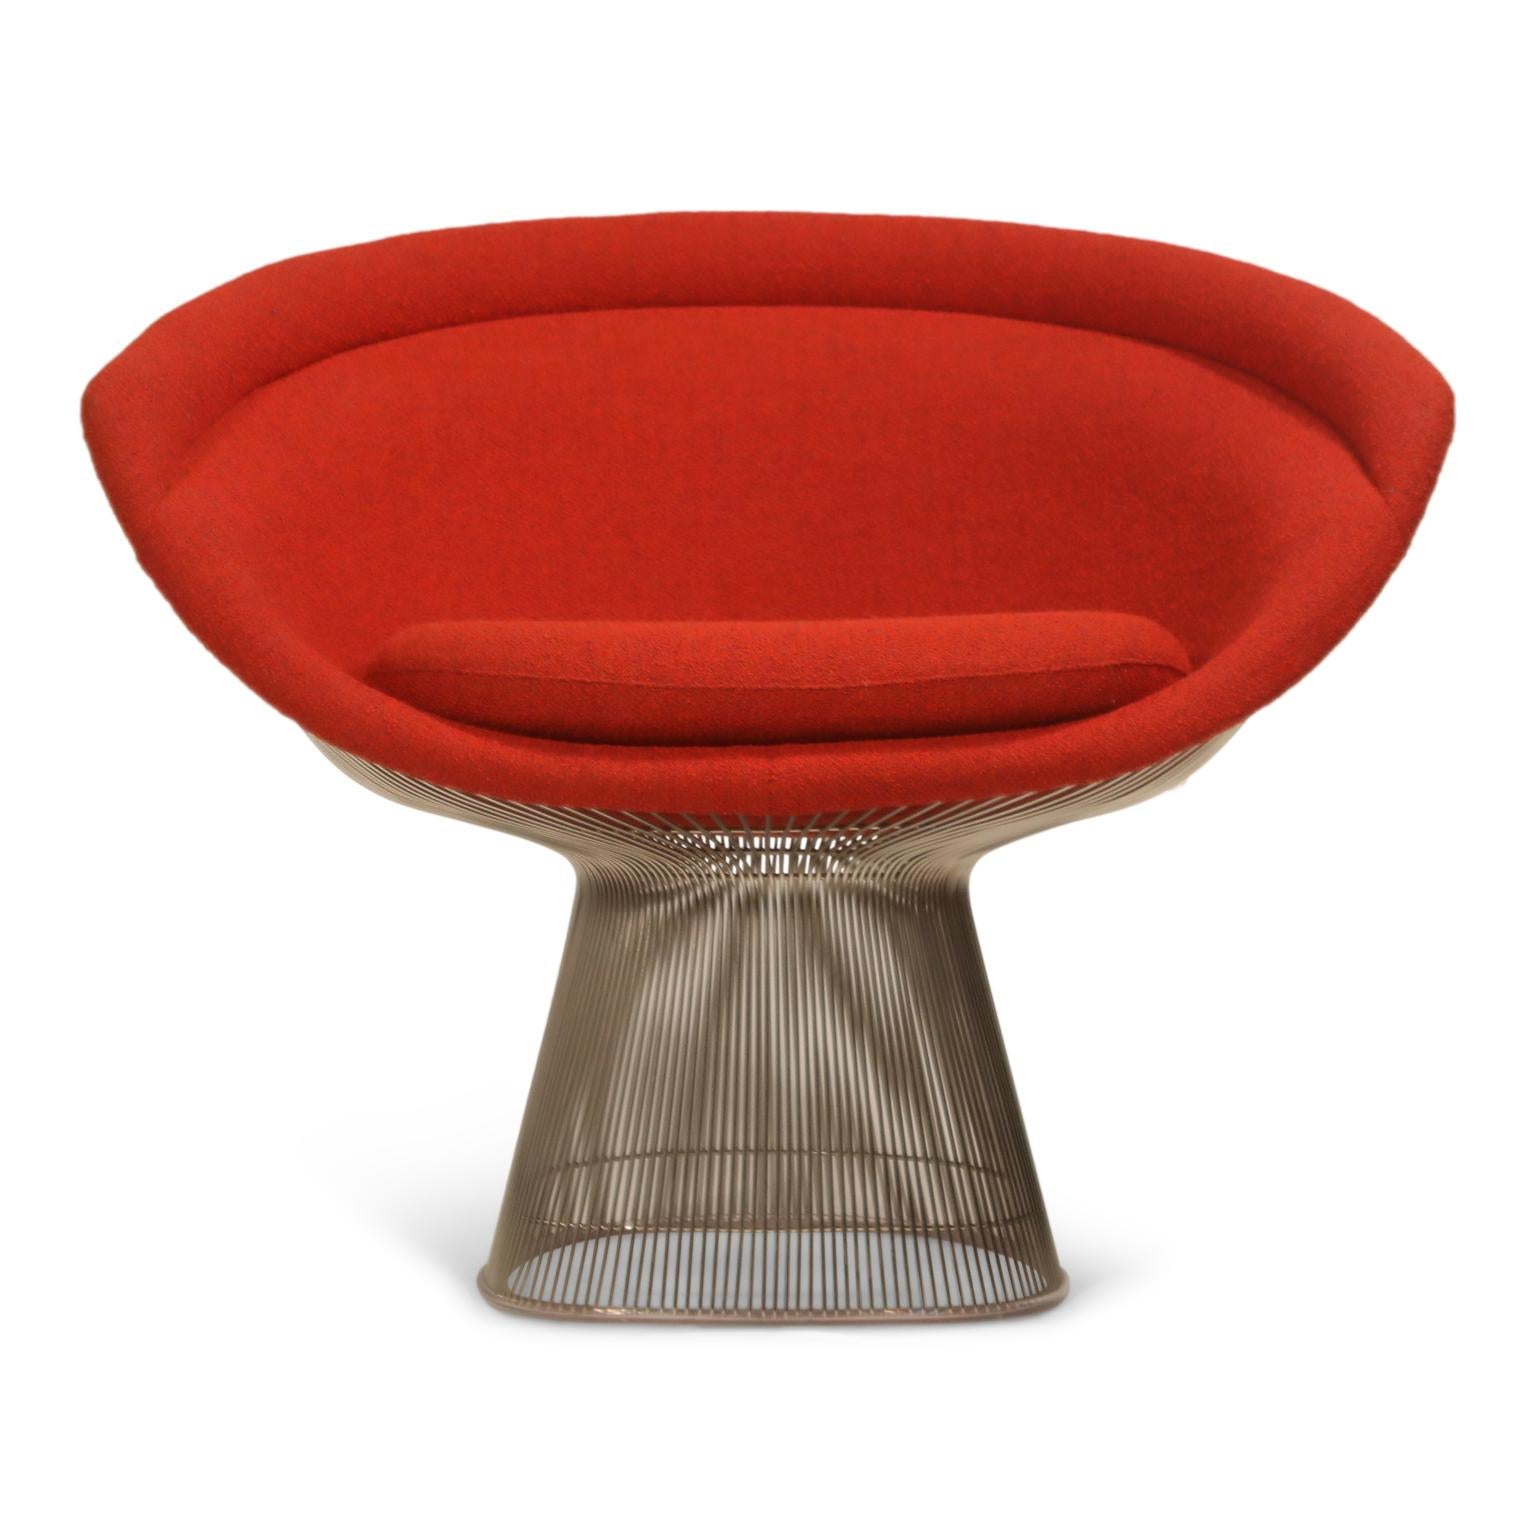 This near-mint condition set of four (priced individually) Warren Platner for Knoll lounge chairs (Model 1715L) are upholstered in a gorgeous red wool boucle fabric over a nickel frame. 

**Note, two chairs have sold so we now have 2 left**

The